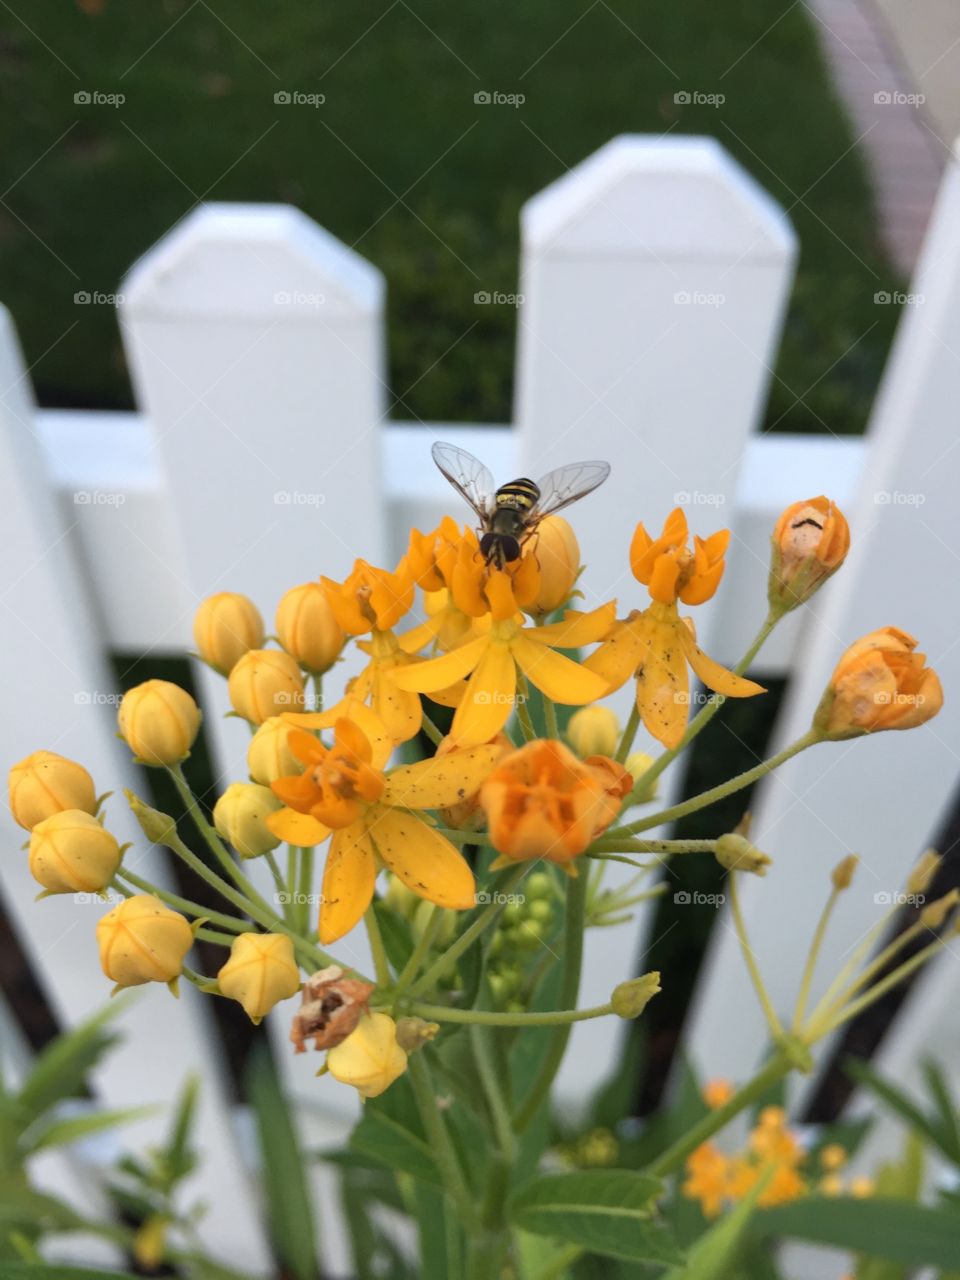 Its still summertime according to the bees! Set against a gorgeously rustic white picket fence, the yellow flowers cling to the last of our warm weather.